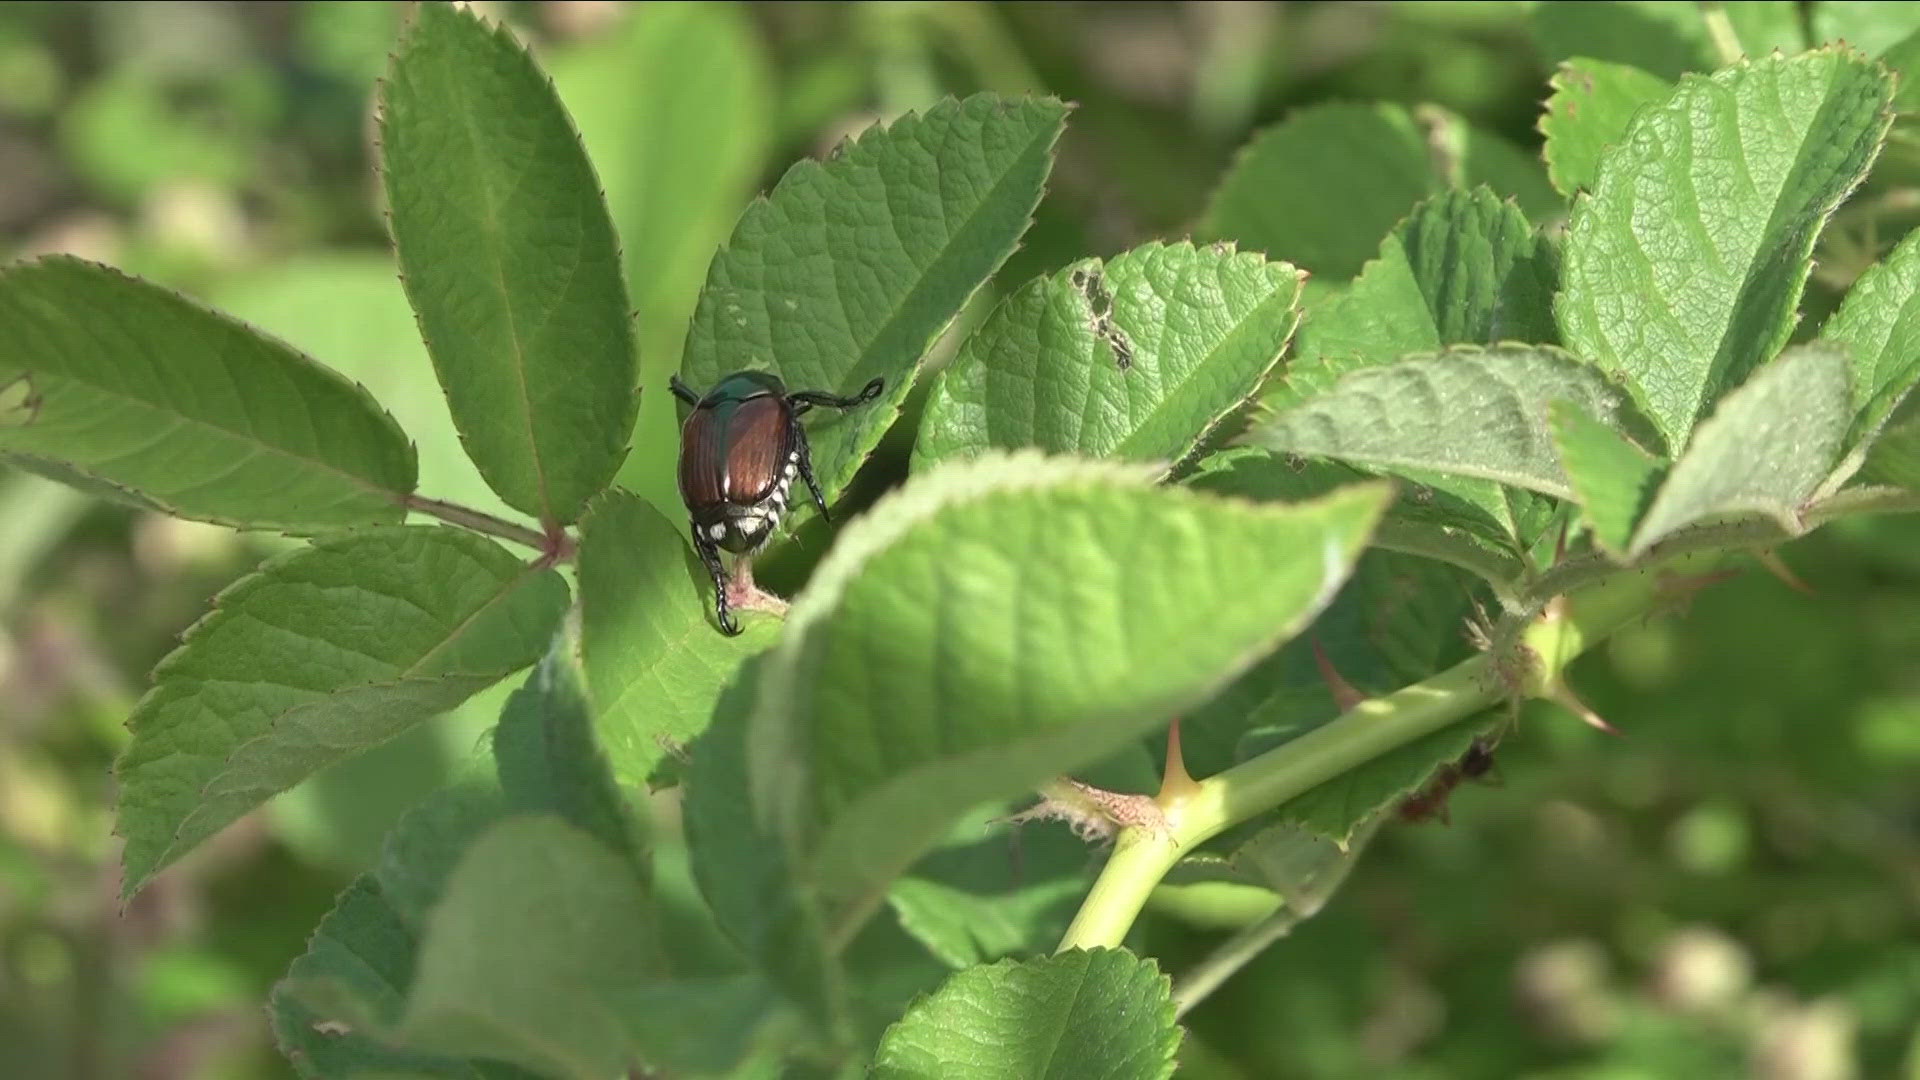 Local garden expert Jackie Albarella predicts beetles will be gone in early August